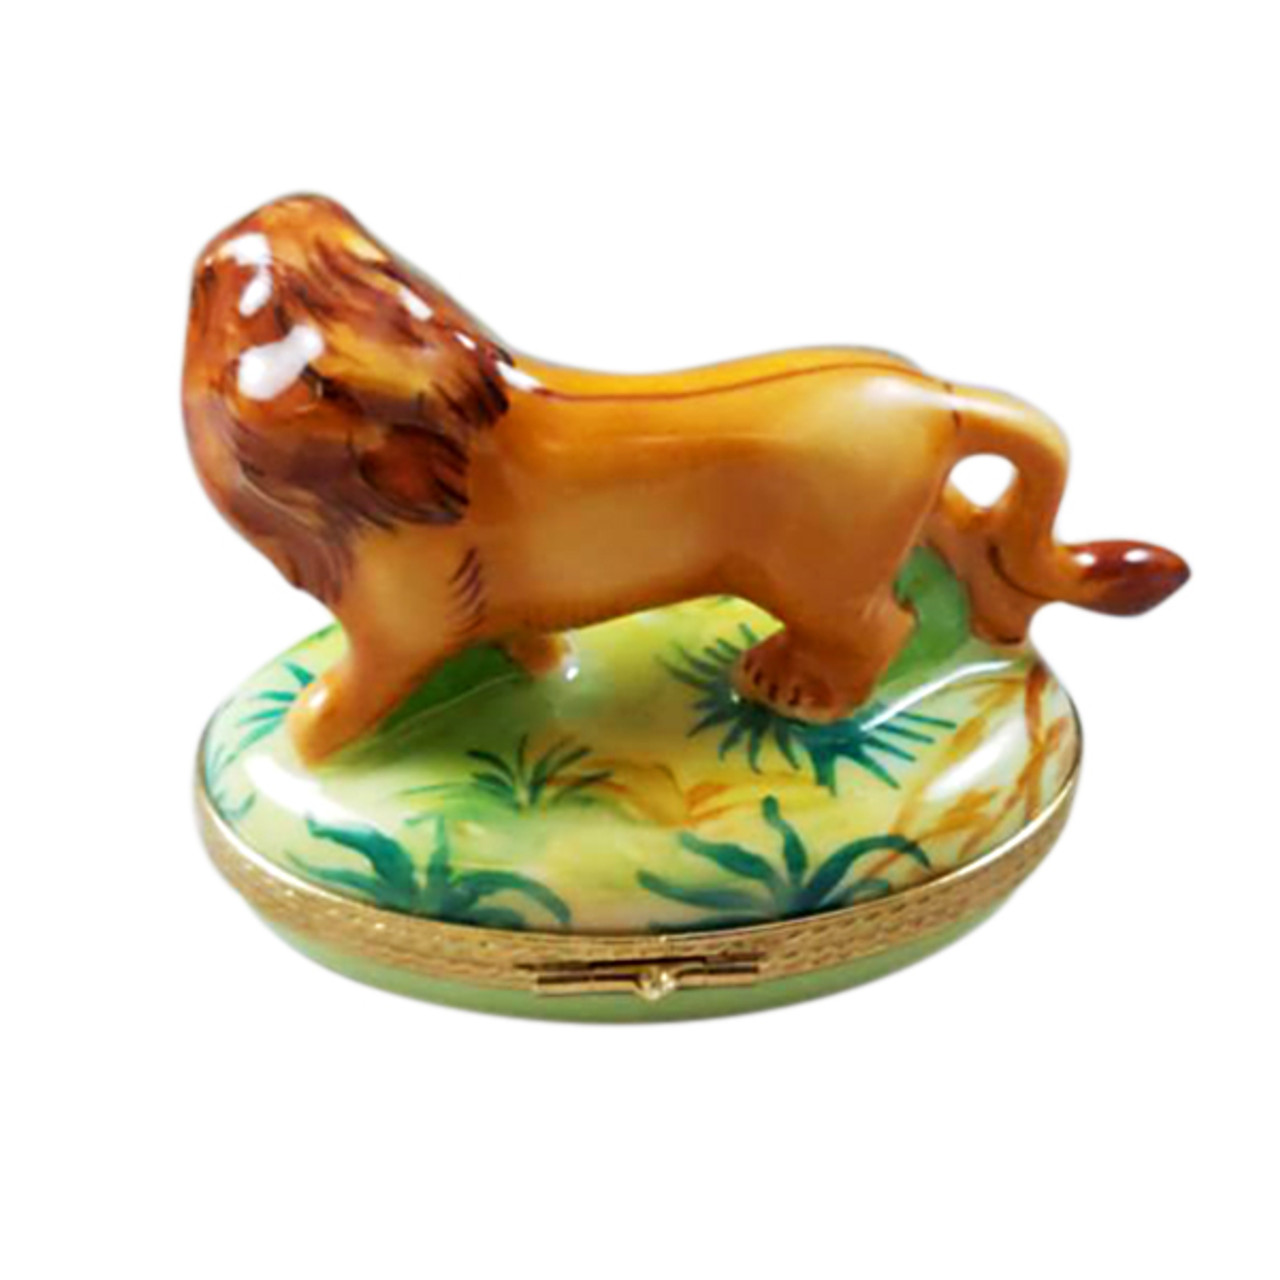 LION WITH REMOVABLE LAMB Limoges Box